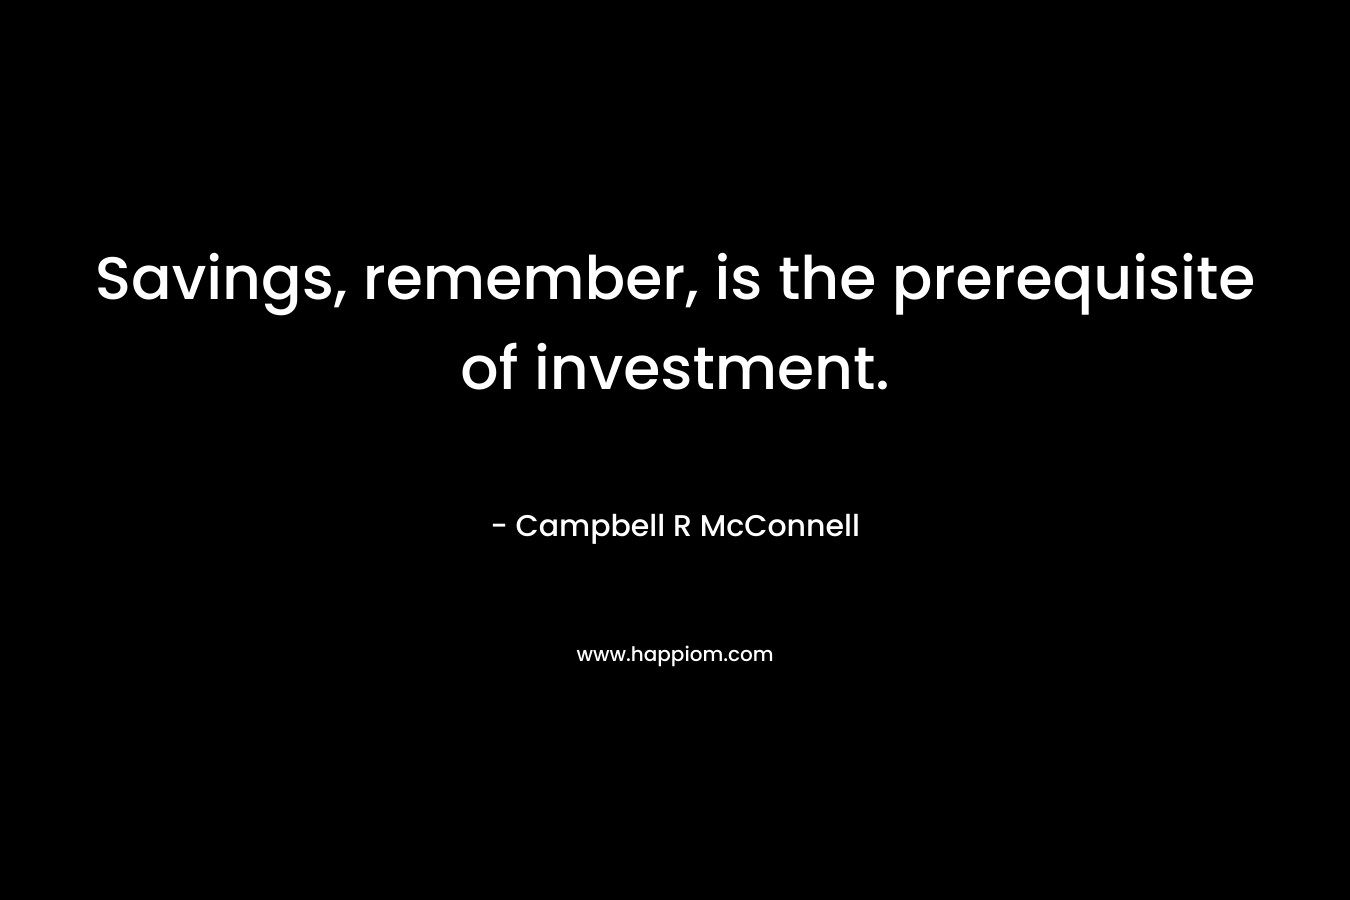 Savings, remember, is the prerequisite of investment. – Campbell R McConnell